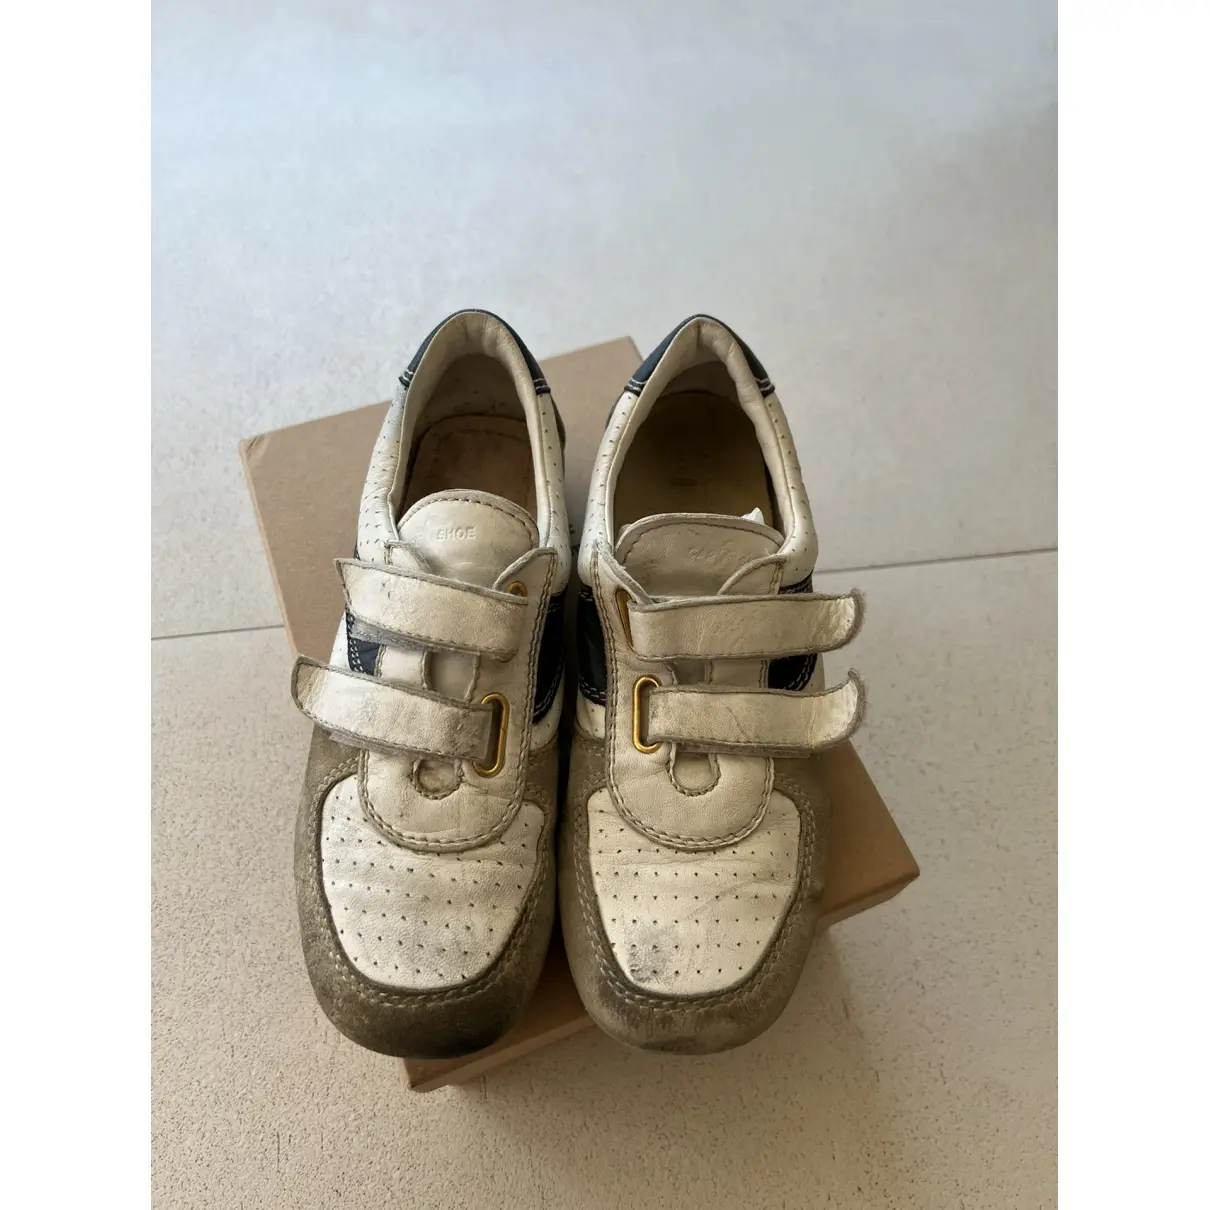 Buy Carshoe Leather trainers online